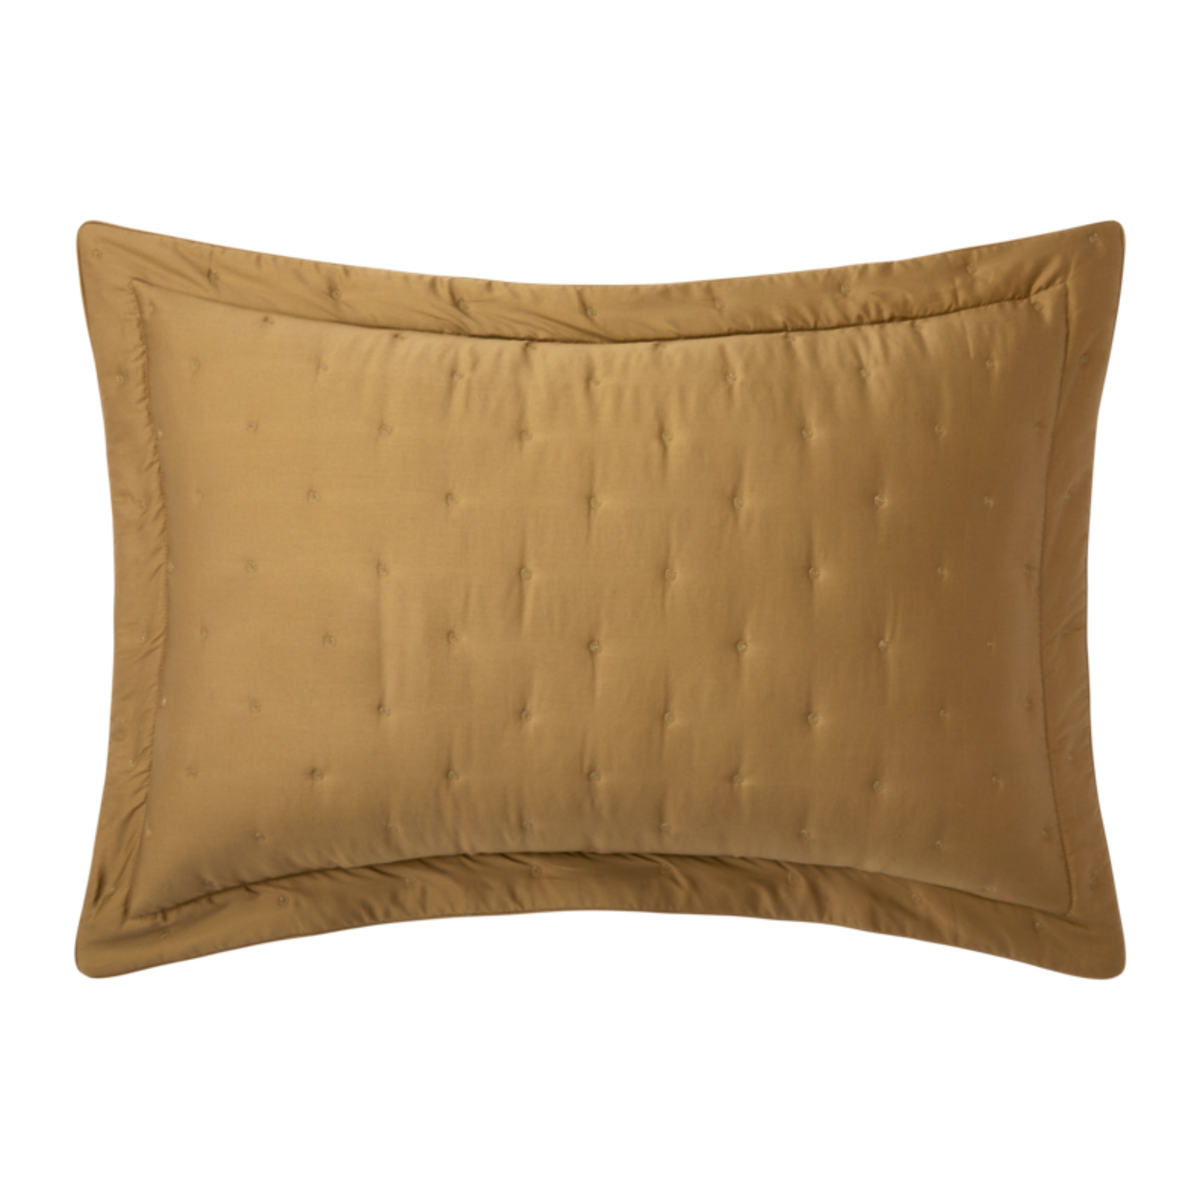 Pillowcase of Yves Delorme Quilted Triomphe Bedding in Bronze Color